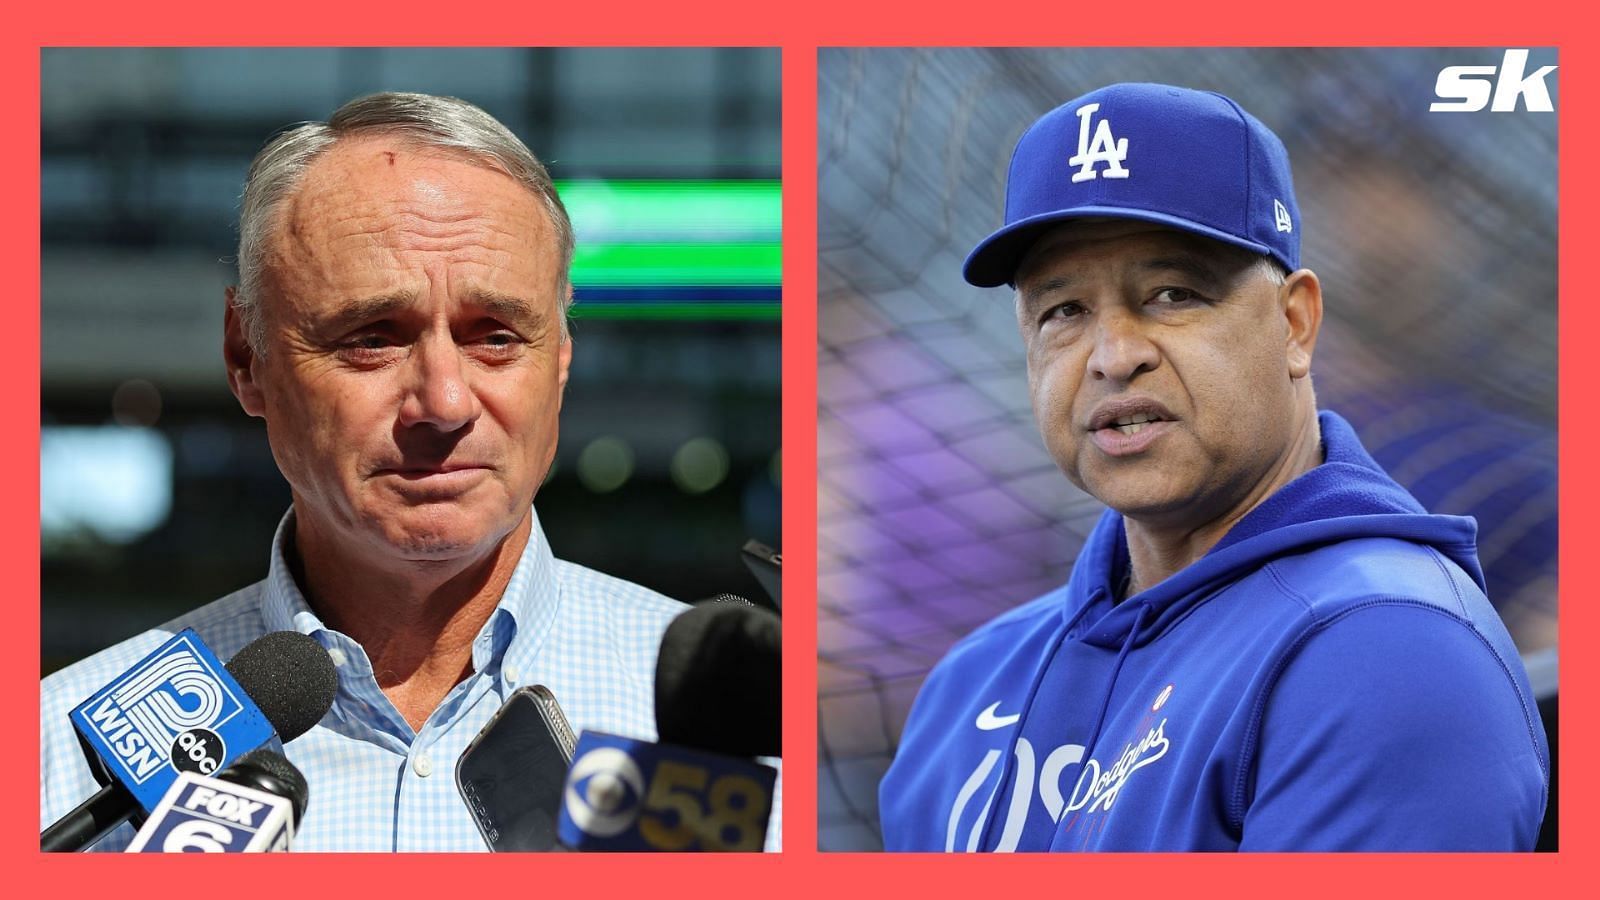 Los Angeles Dodgers manager Dave Roberts on MLB commissioner Rob Manfred&rsquo;s regret on handling of Houston Astros&rsquo; cheating scandal